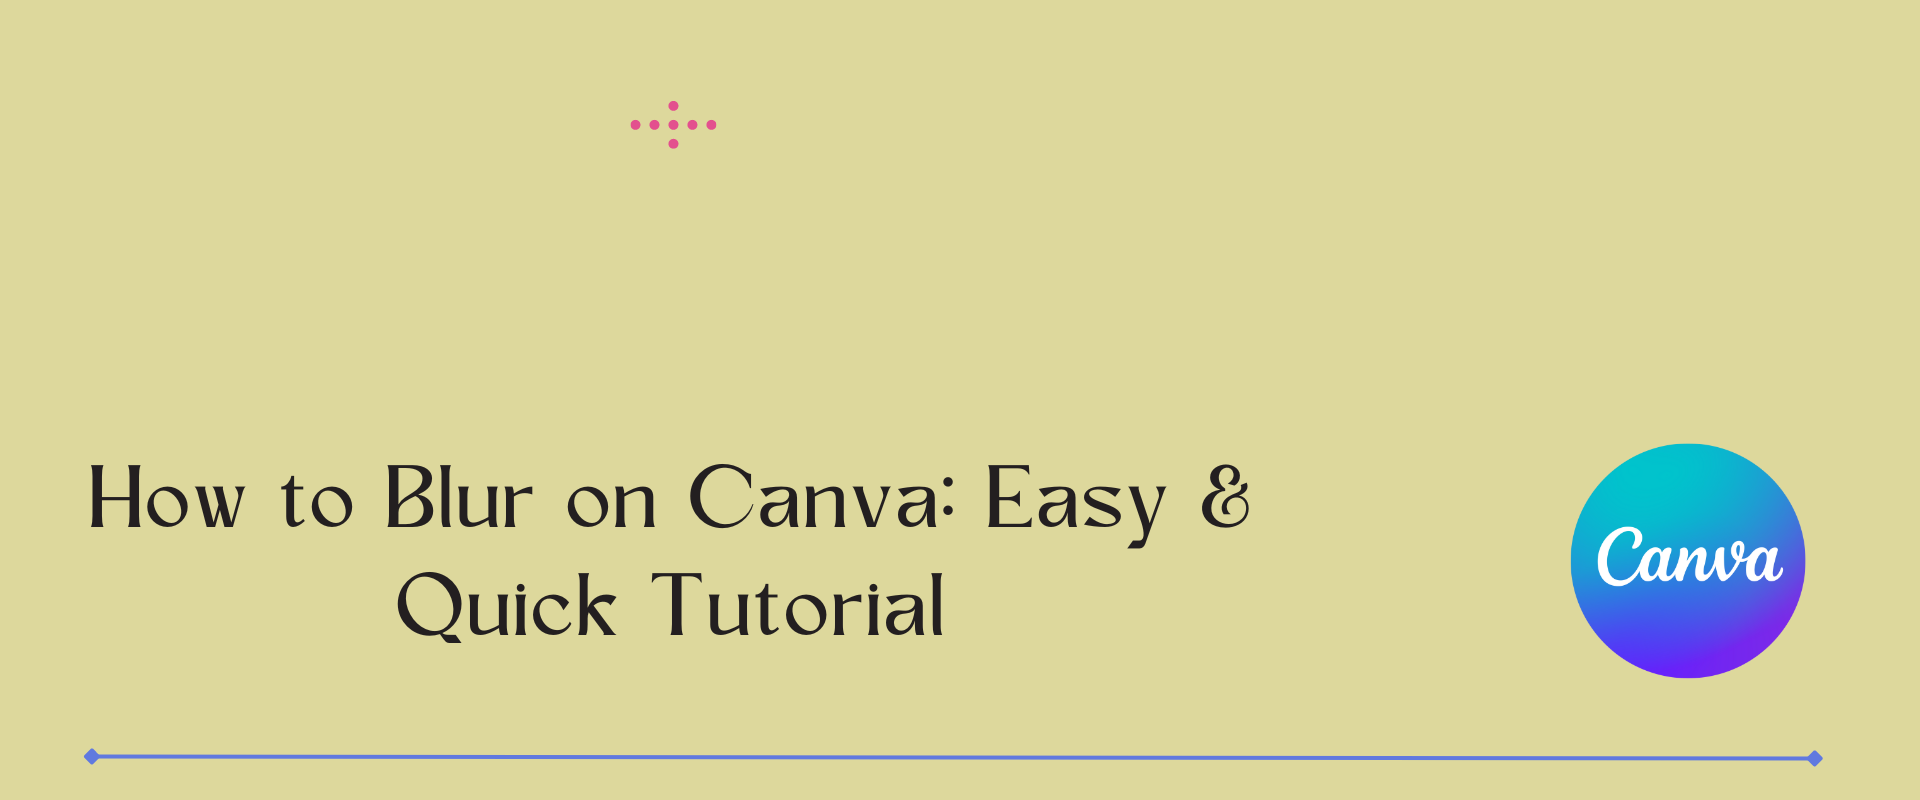 How to Blur on Canva: Easy & Quick Tutorial